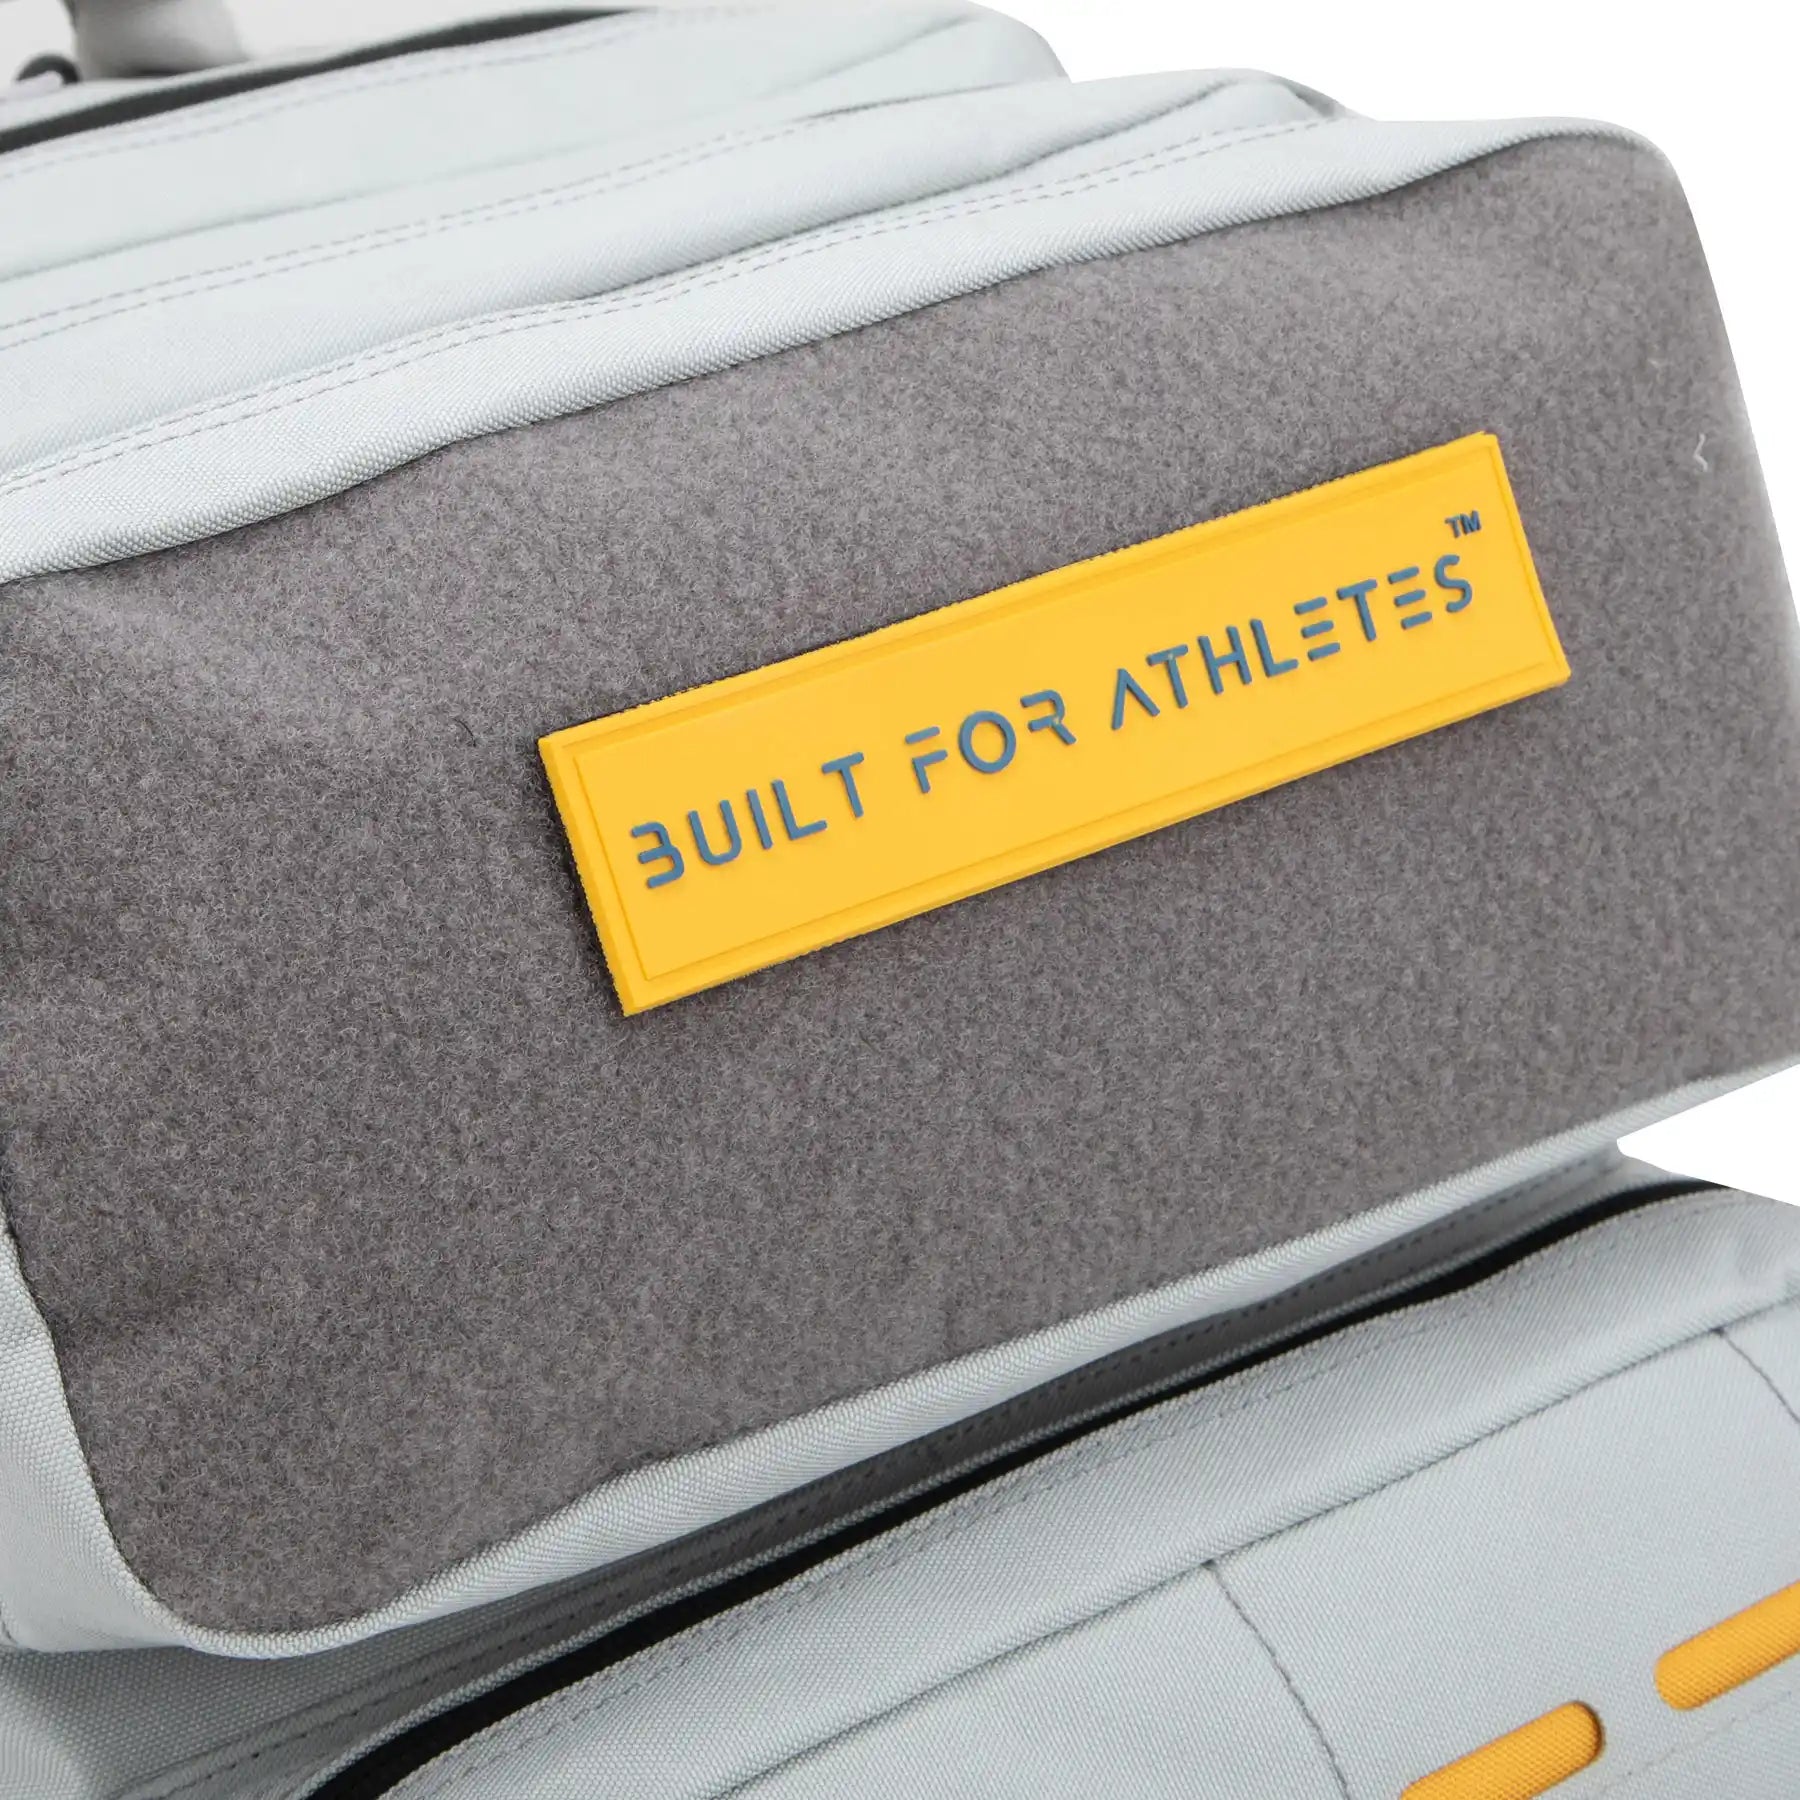 Built for Athletes Backpacks Small Grey & Yellow Backpack